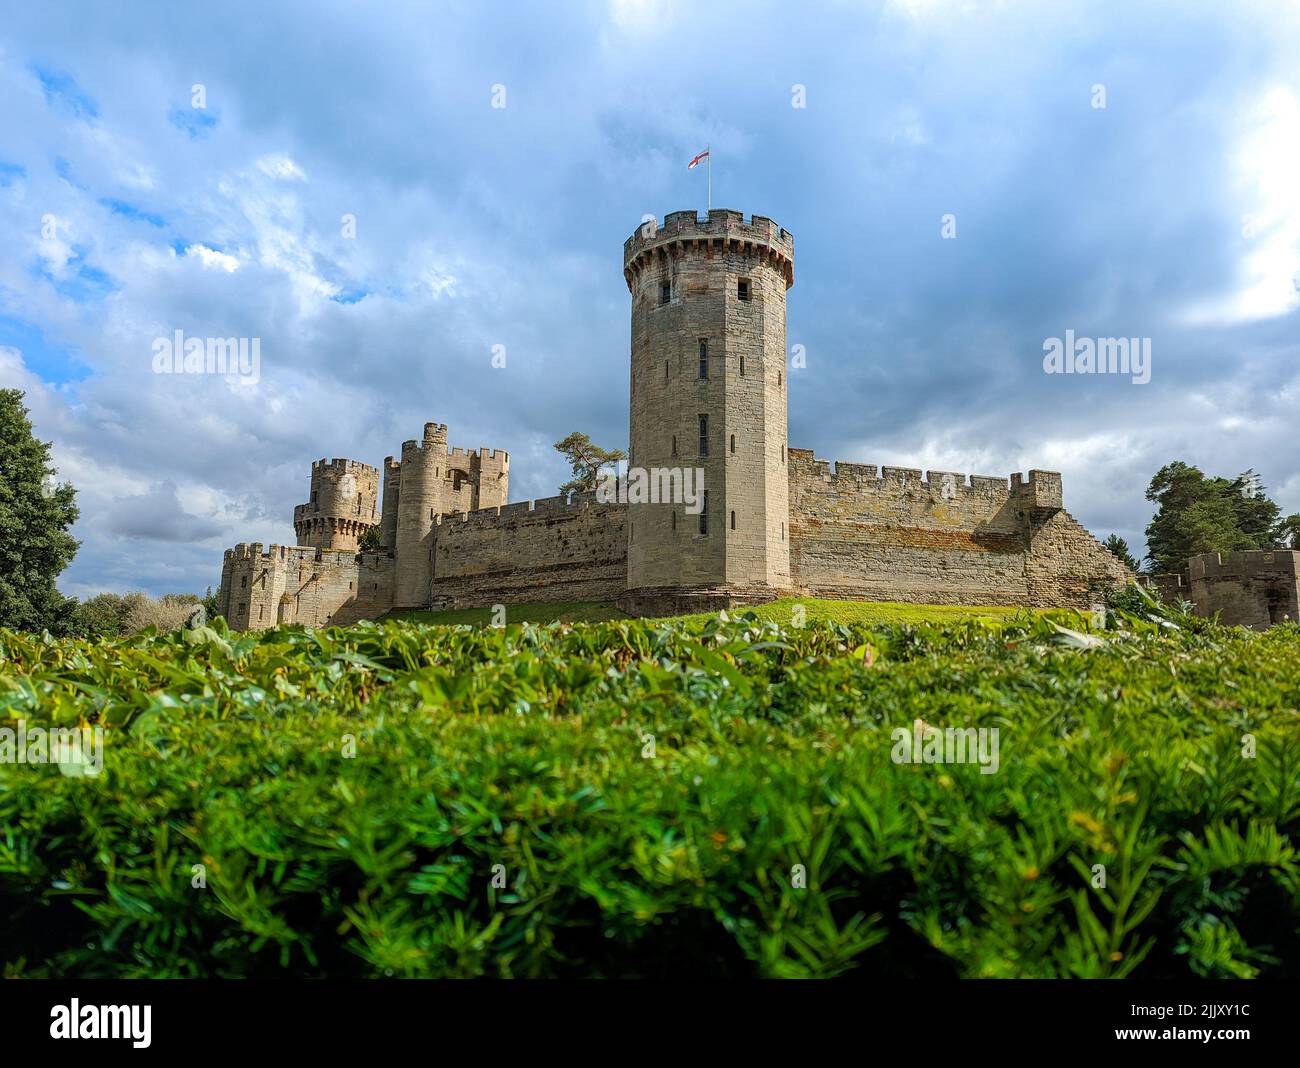 Warwick Castle s a medieval castle original built by William the Conqueror in 1068. View on the Medieval castle tower and gatehouse, Warwick, Warwicks Stock Photo